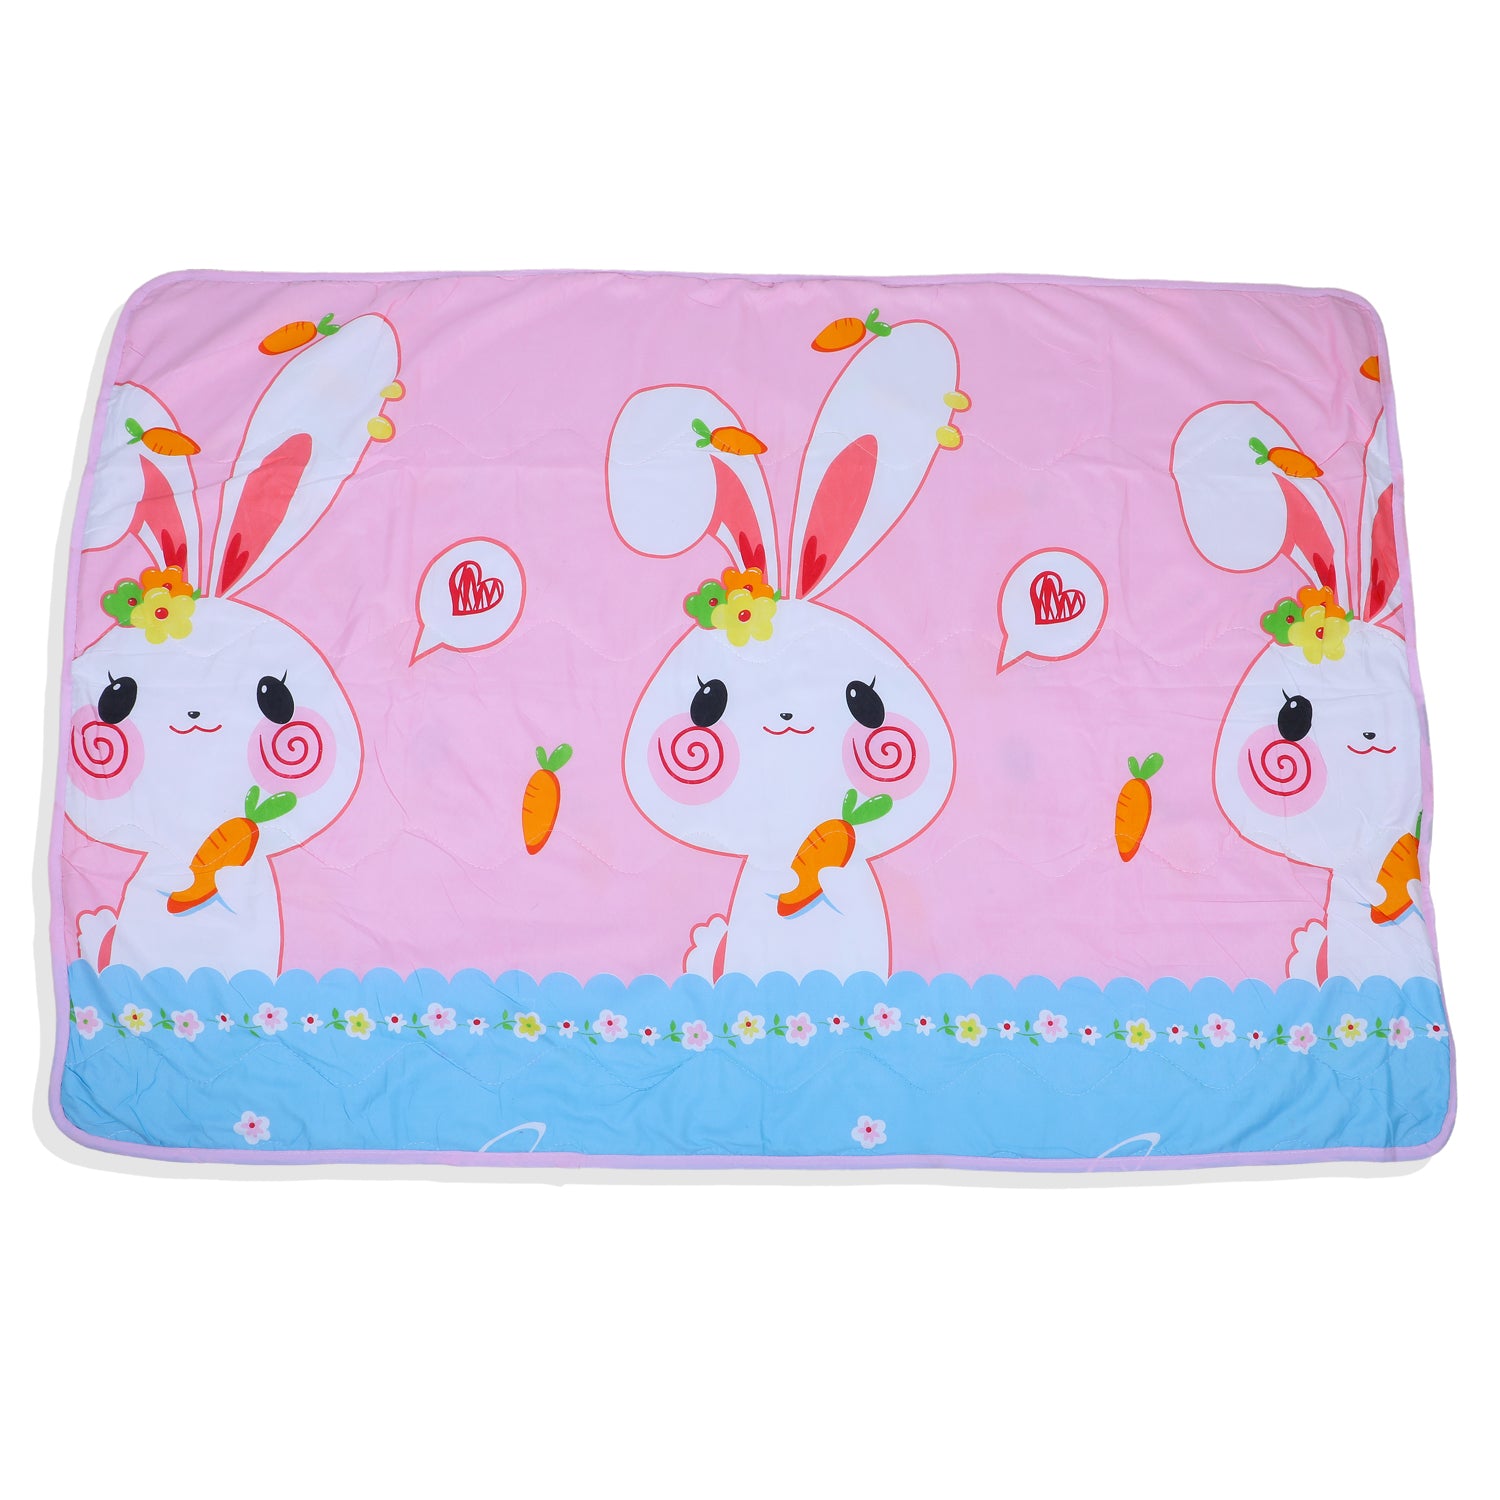 Baby Moo Hungry Bunny Soft Quilted Premium Reversible Blanket - Pink - Baby Moo